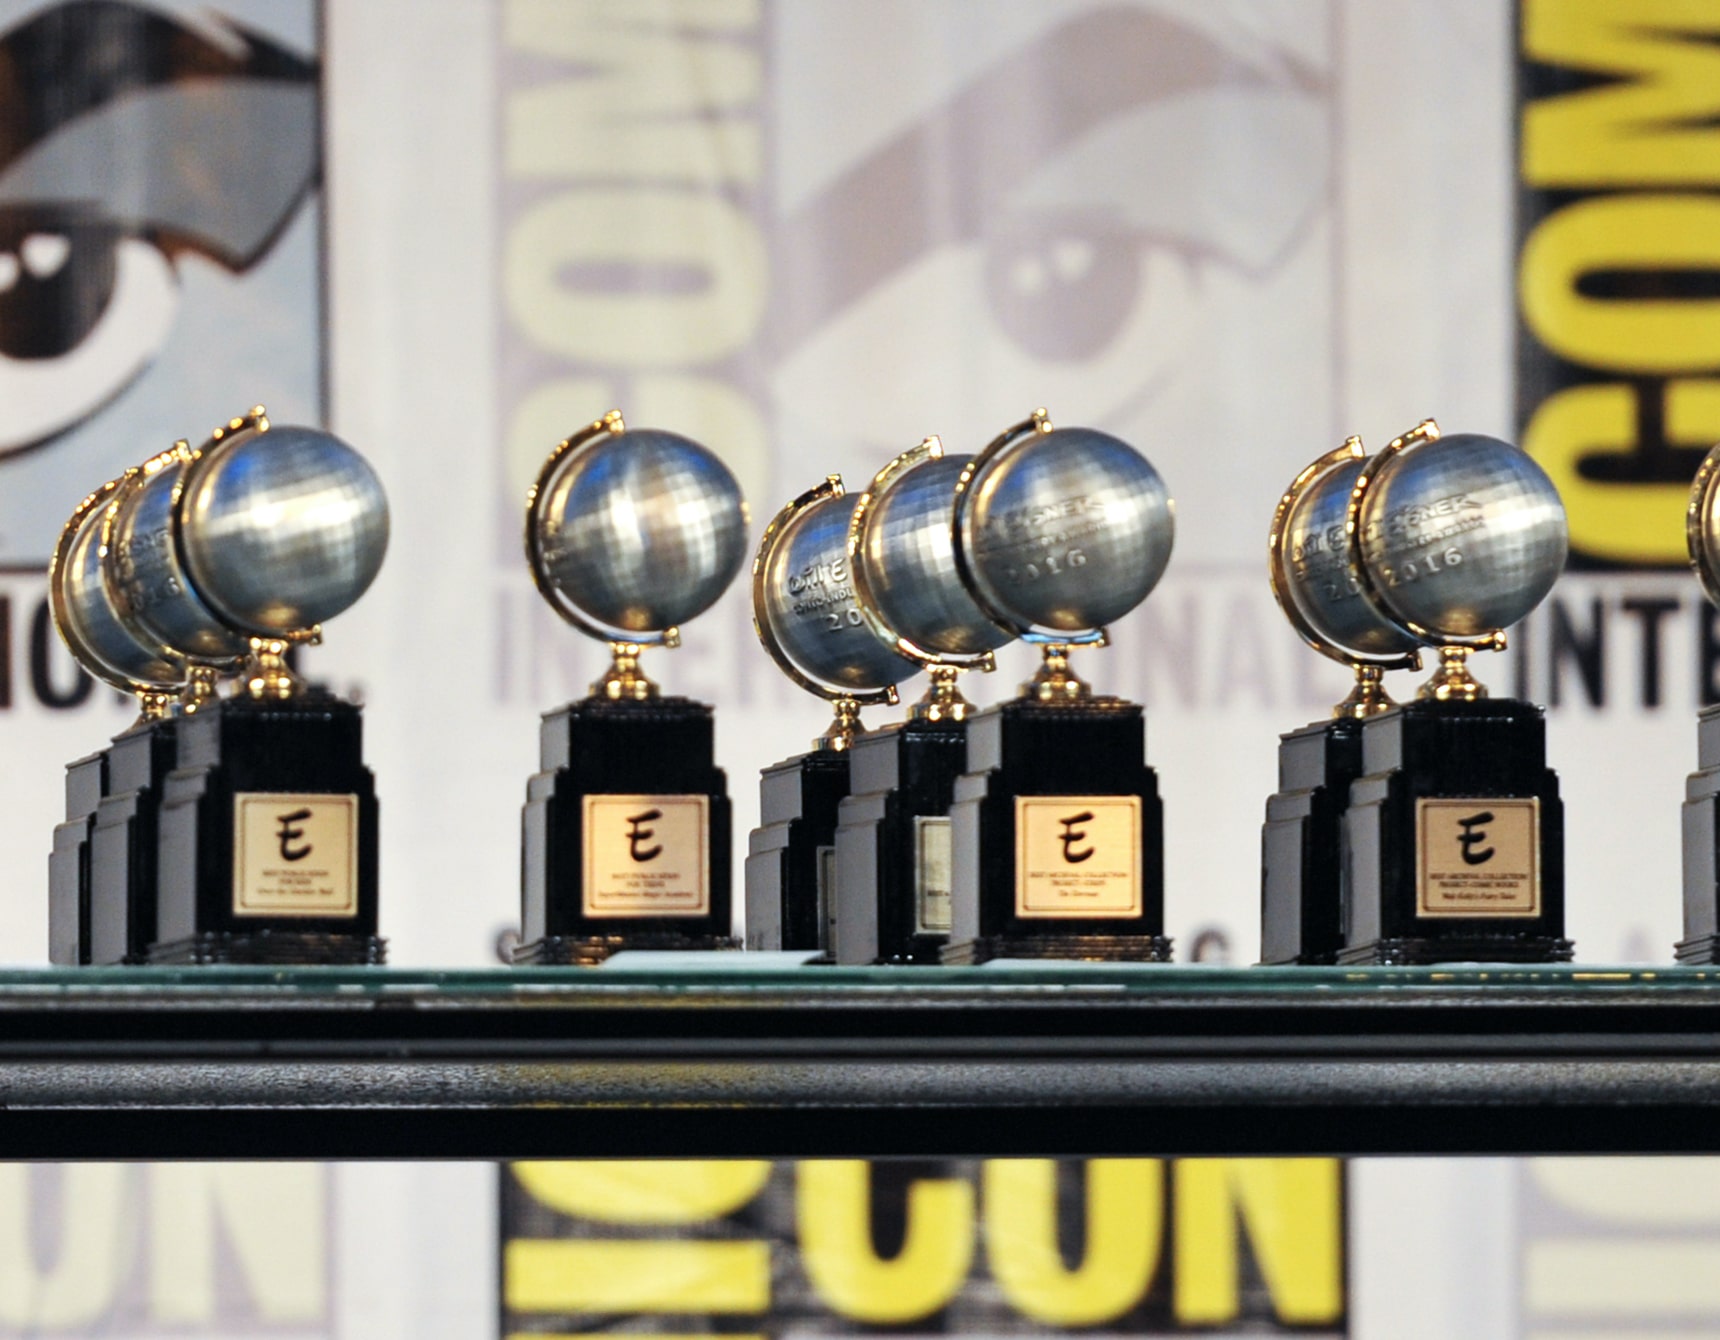 2022 Eisner Awards nominees announced with DC Comics getting the most nominations